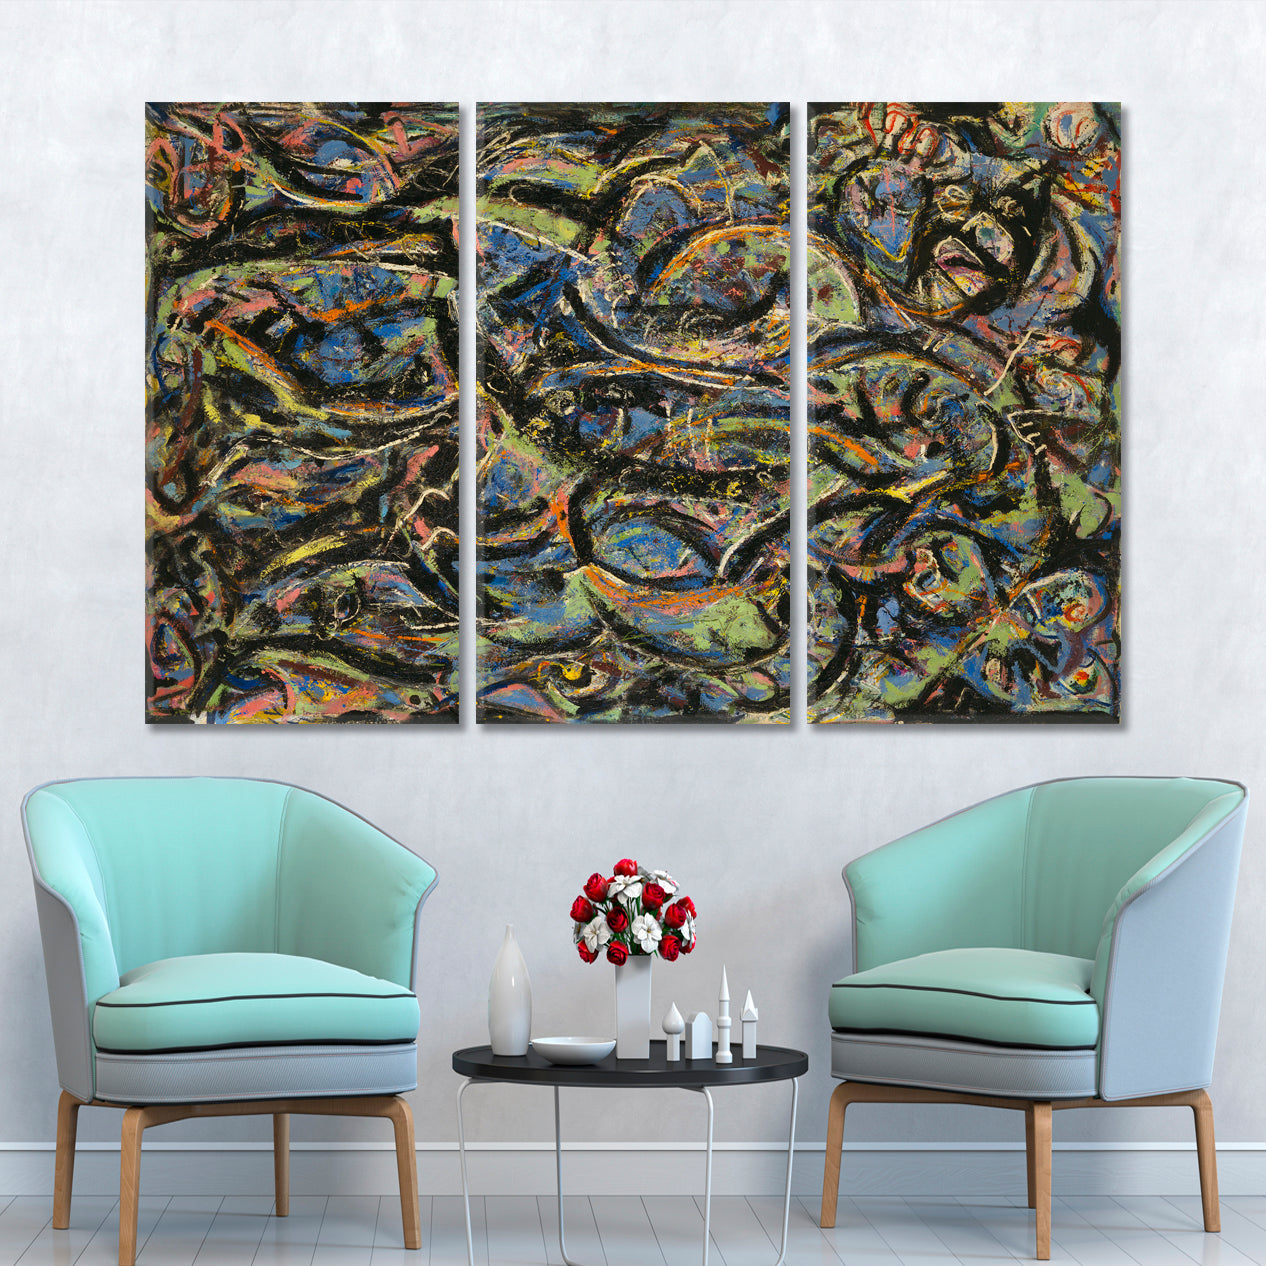 GOTHIC Pollock Style Reproduction Abstract Art Print Artesty 3 panels 36" x 24" 